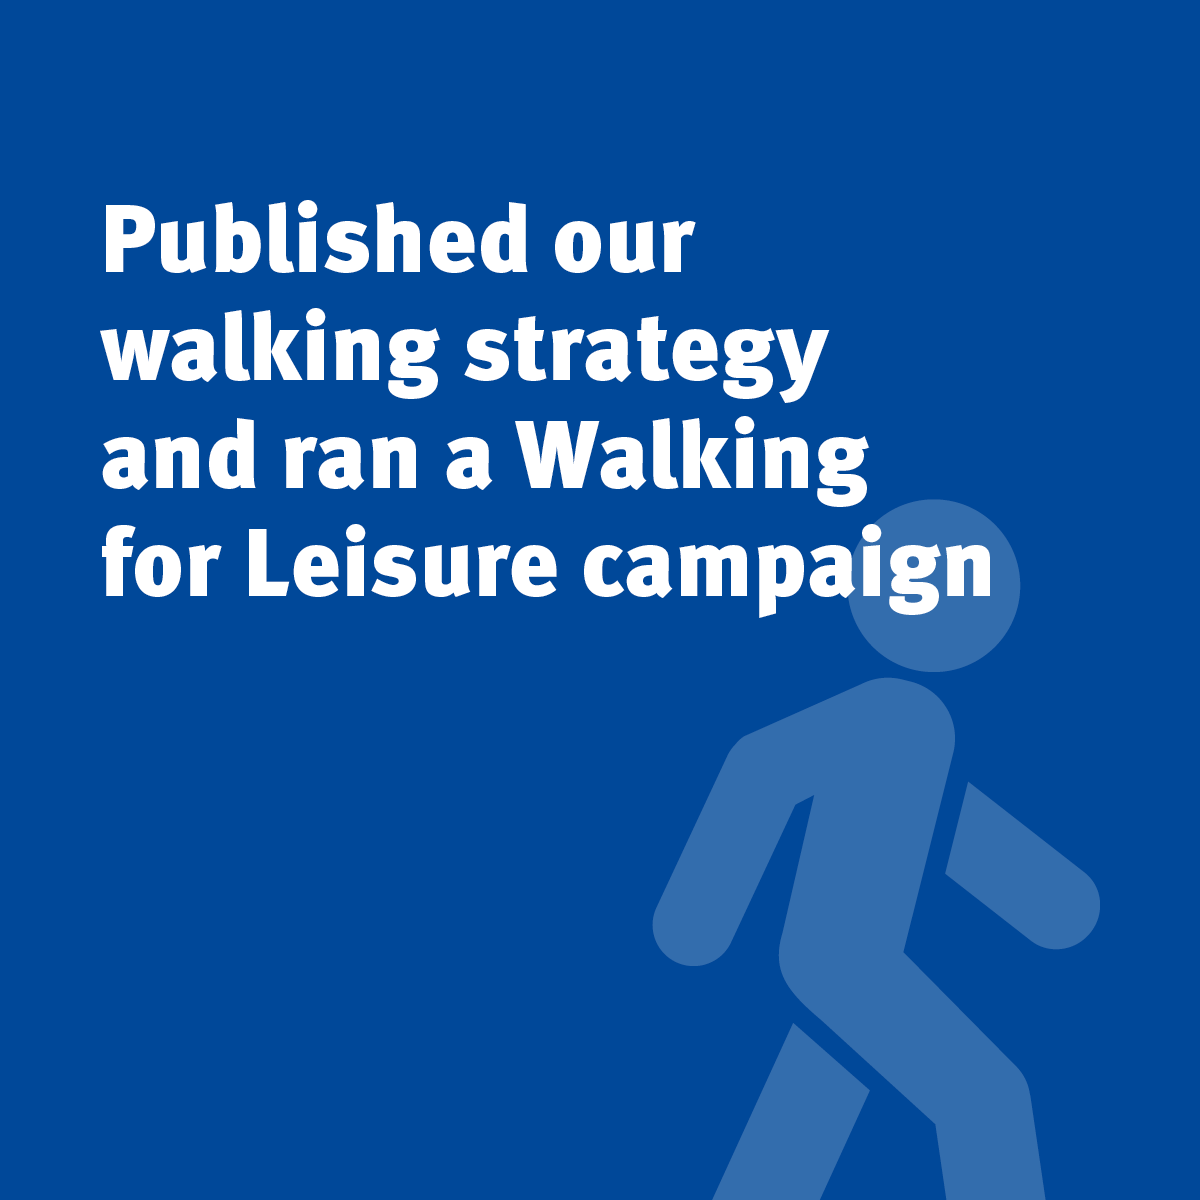 Published our walking strategy and ran a Walking for Leisure campaign